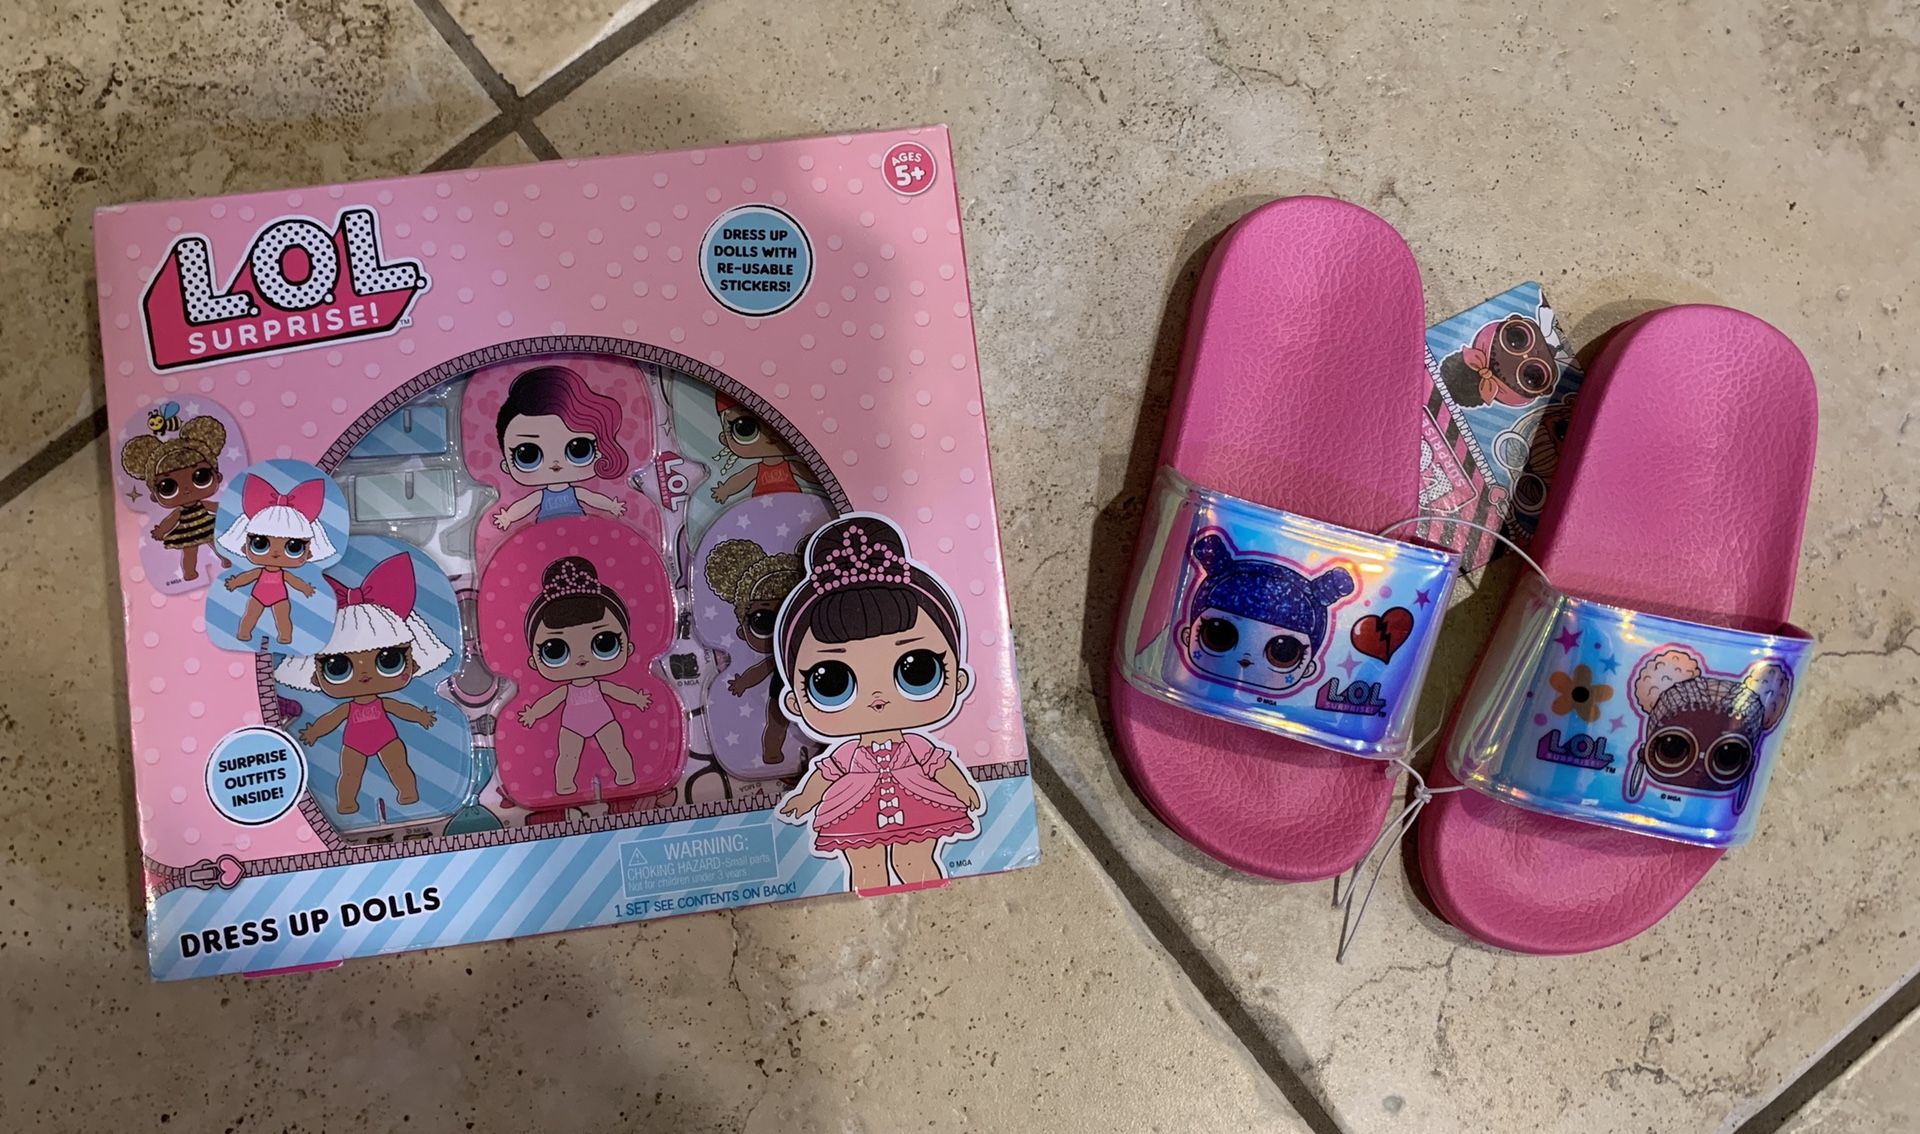 LOL Girls Shoes Slides, Size 11/12, Dress Up Paper Dolls. New in Package.